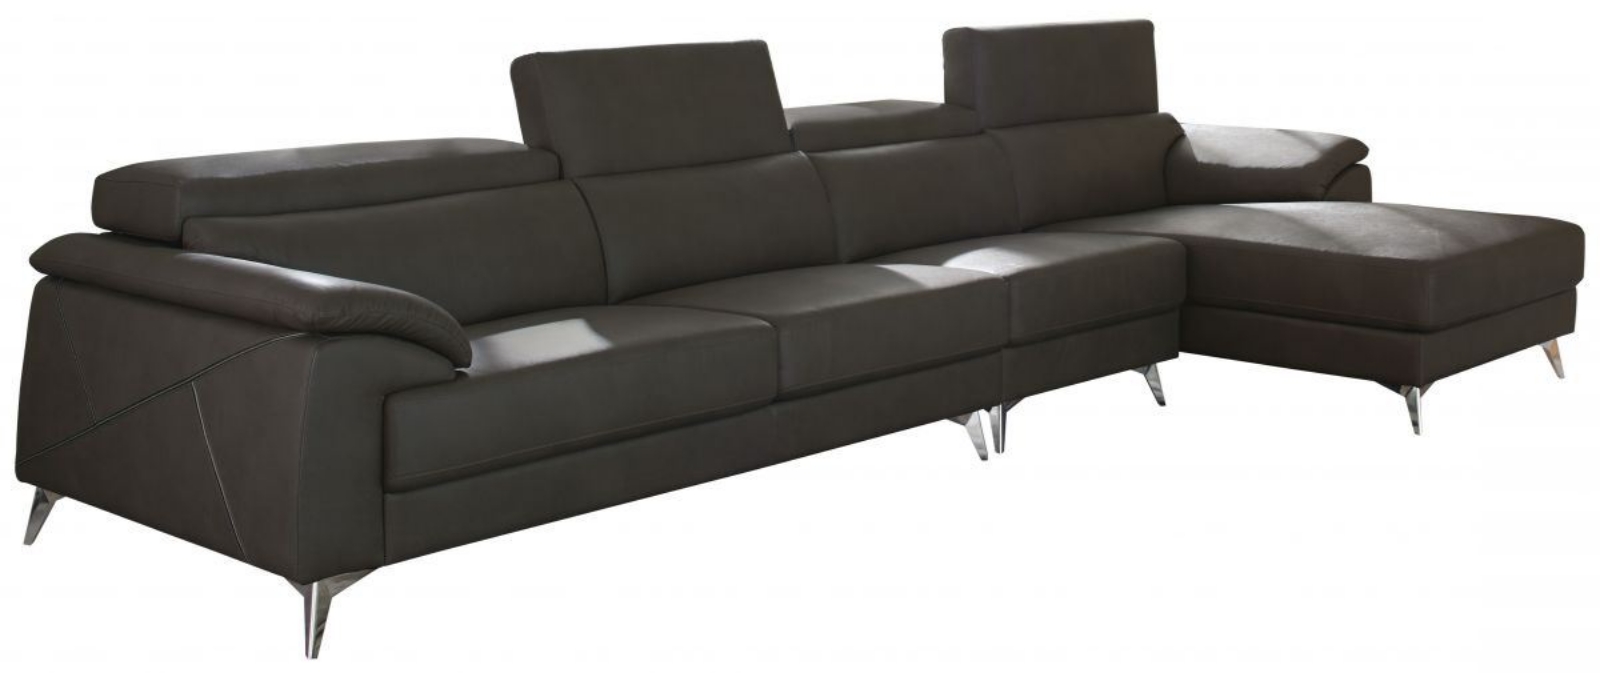 Picture of Tindell Sectional